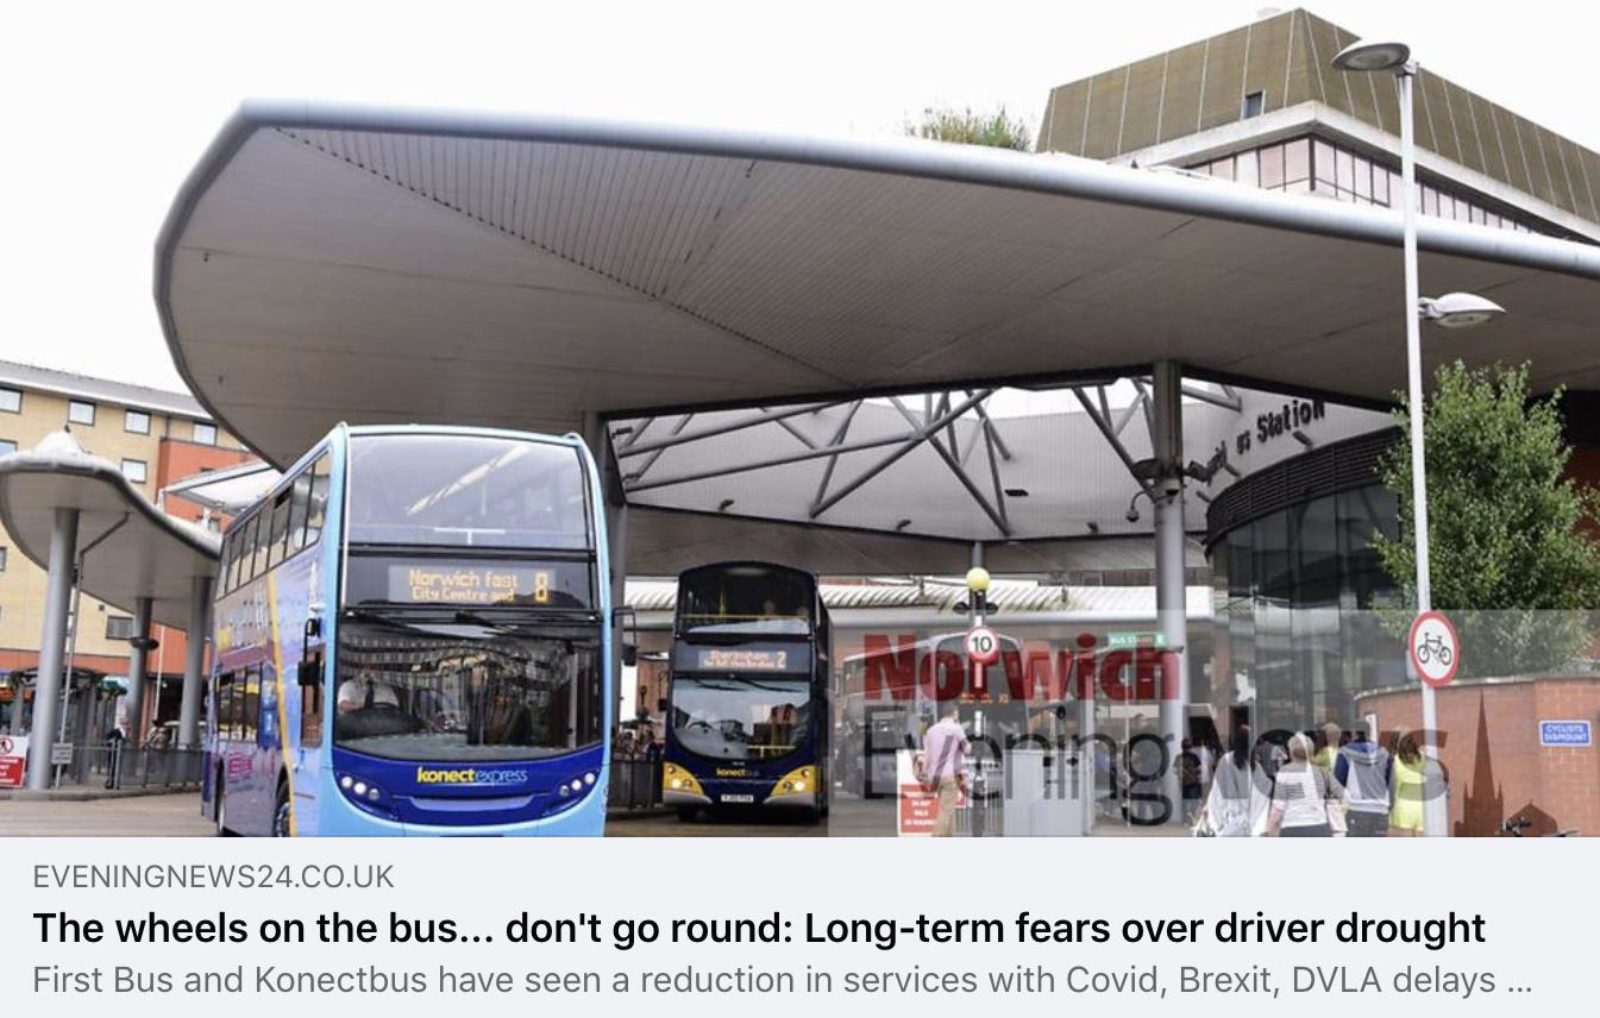 Image shows a picture an EDP article with an image of Norwich bus station. The title of the article reads "The wheels on the bus... don